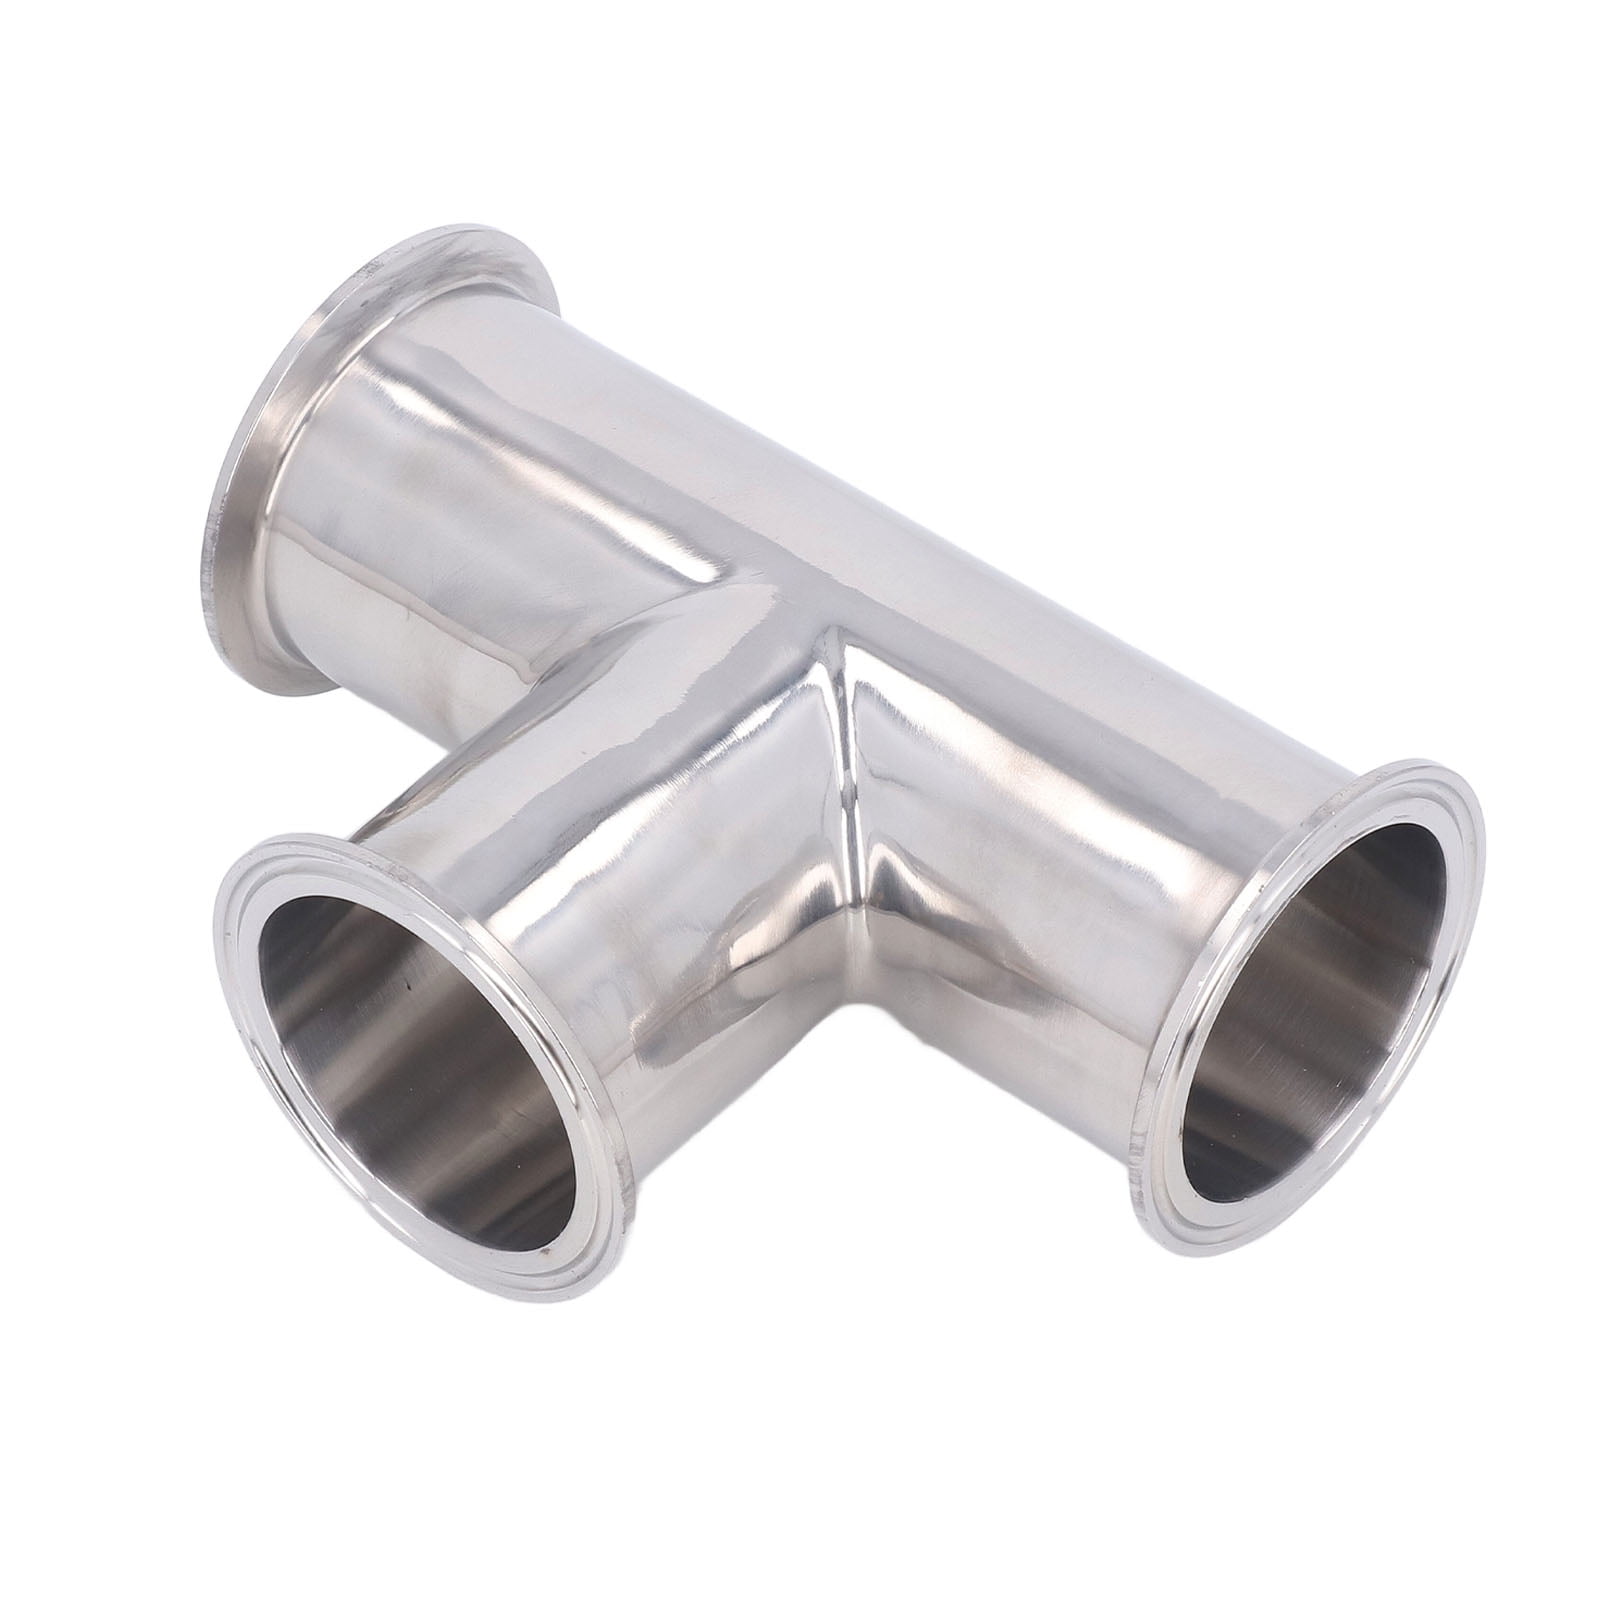 304 Stainless Steel Triple Clamp Tee 3-Way Hose Pipe Fitting Connector ...